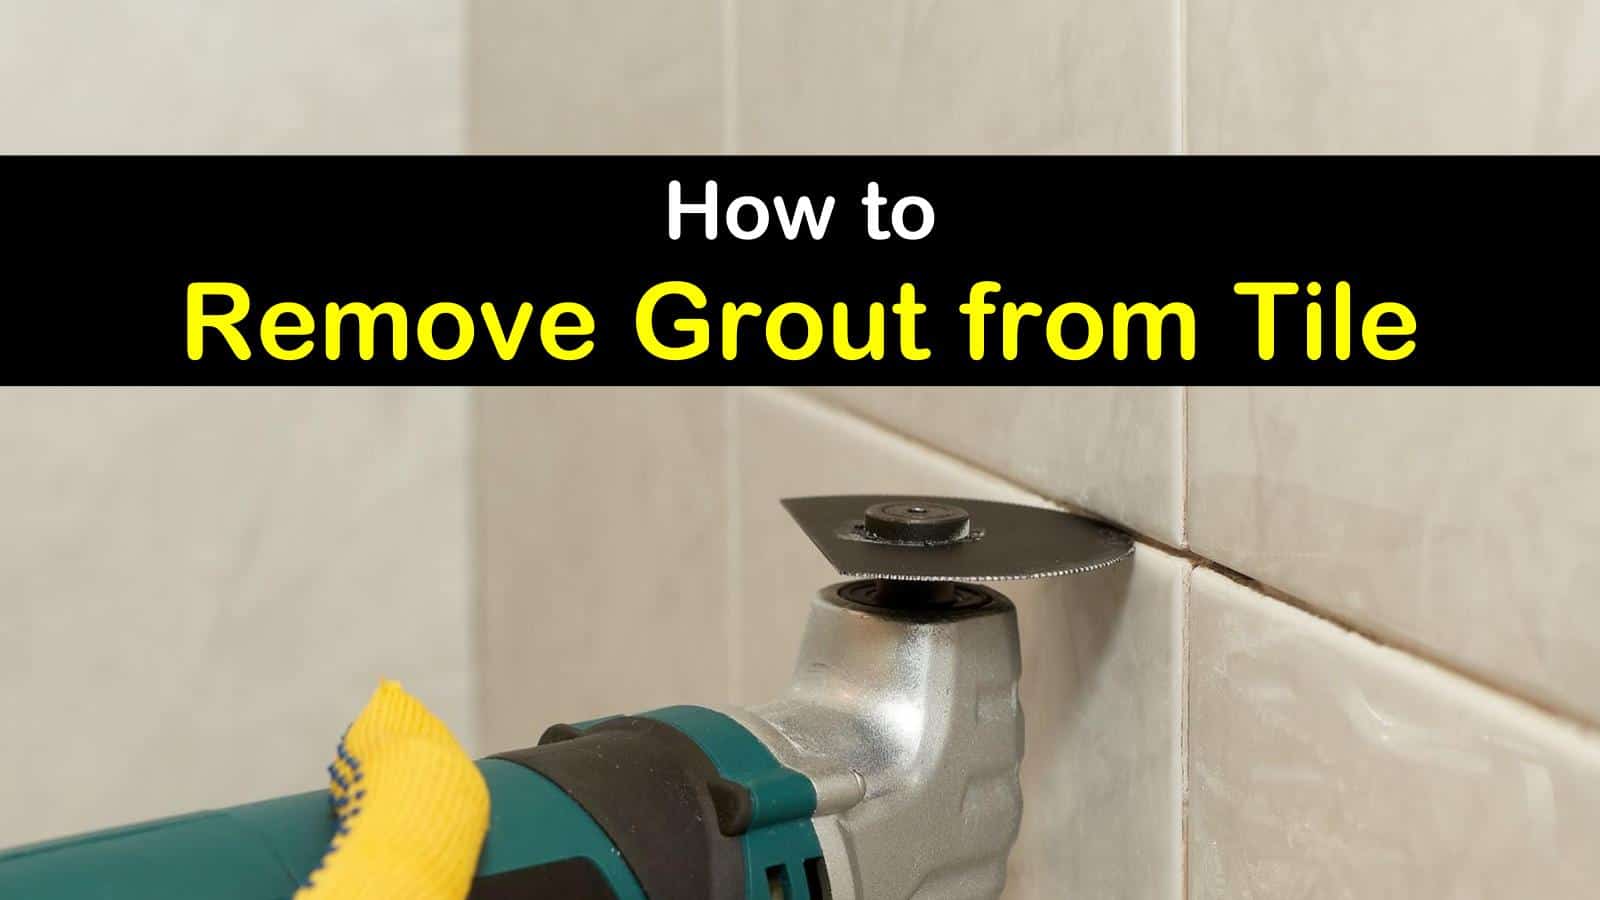 how to remove grout from tile titleimg1